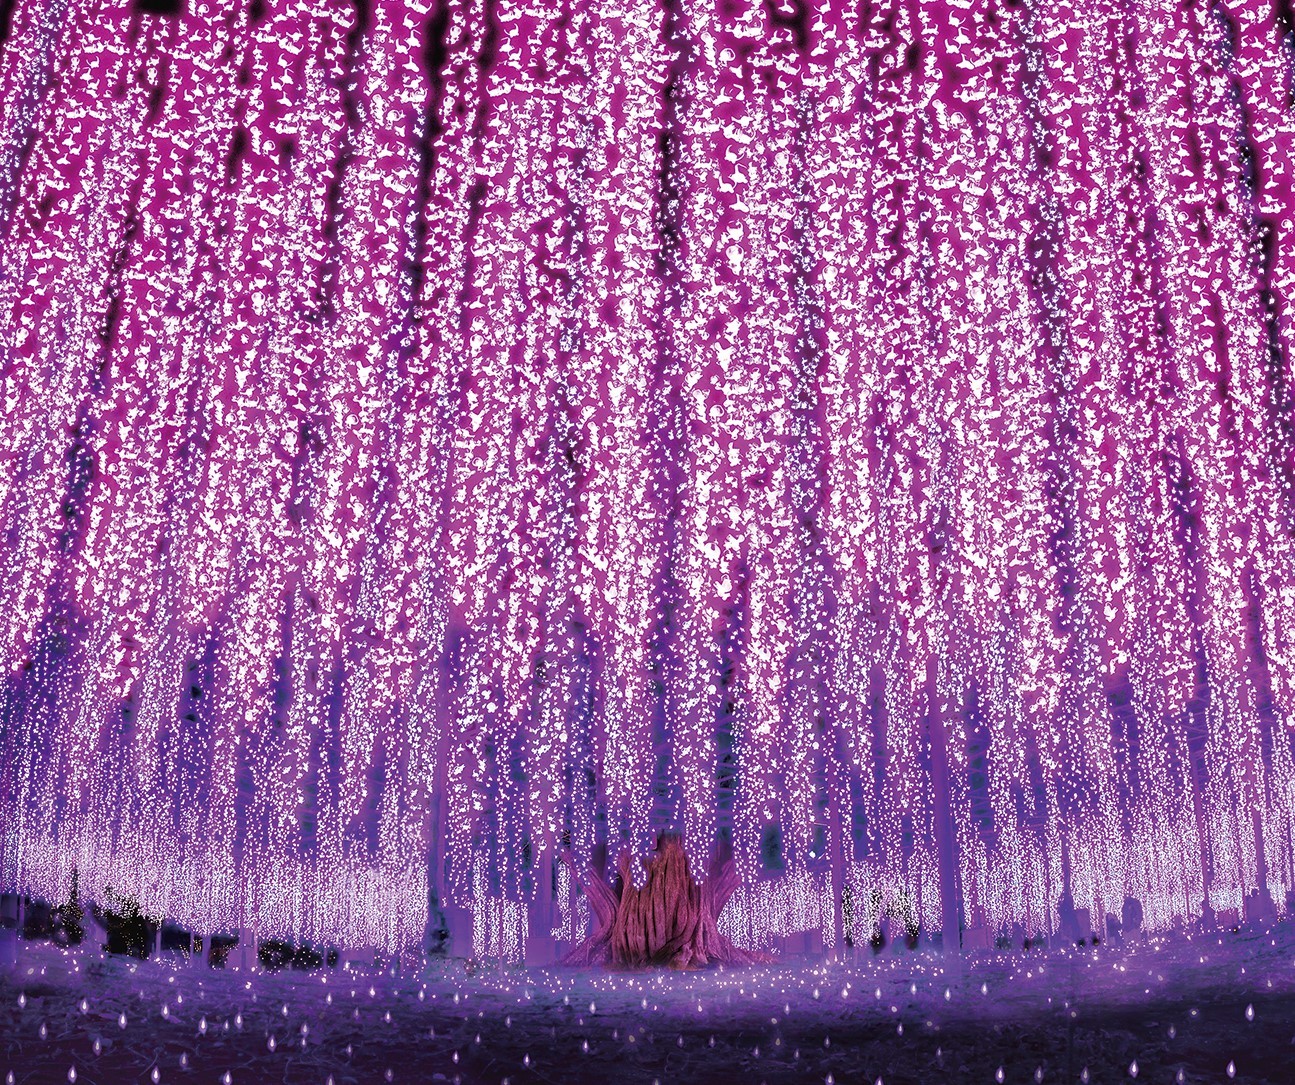 [The tale of Fuji no Hana of Light] Four colors of lights on a single large wisteria will shift and change along with music